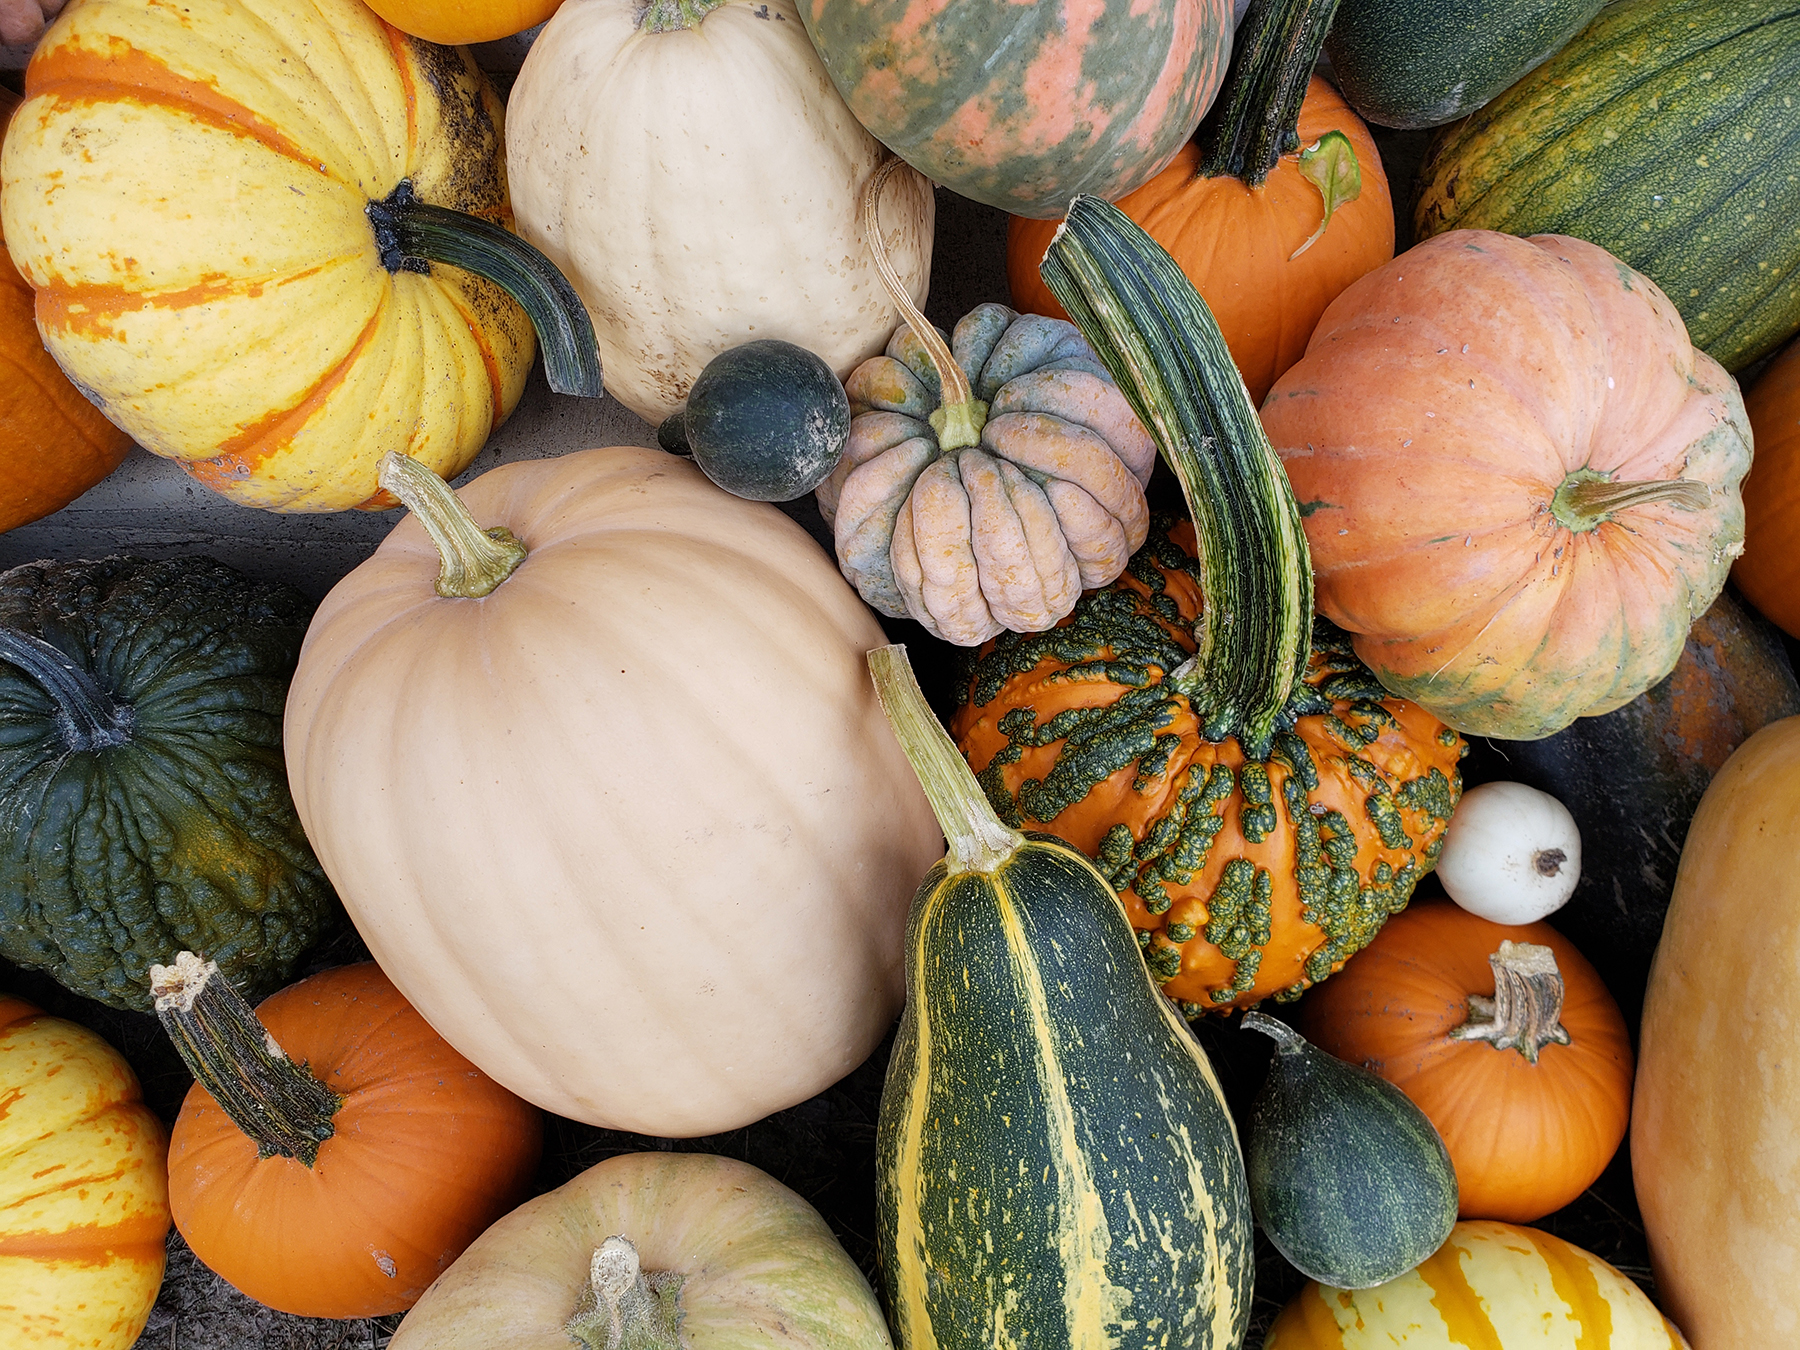 Pumpkins come in varying colors, shapes, textures and sizes, all signs of fall’s arrival. Photos courtesy of MU Extension horticulturist Katie Kammler.